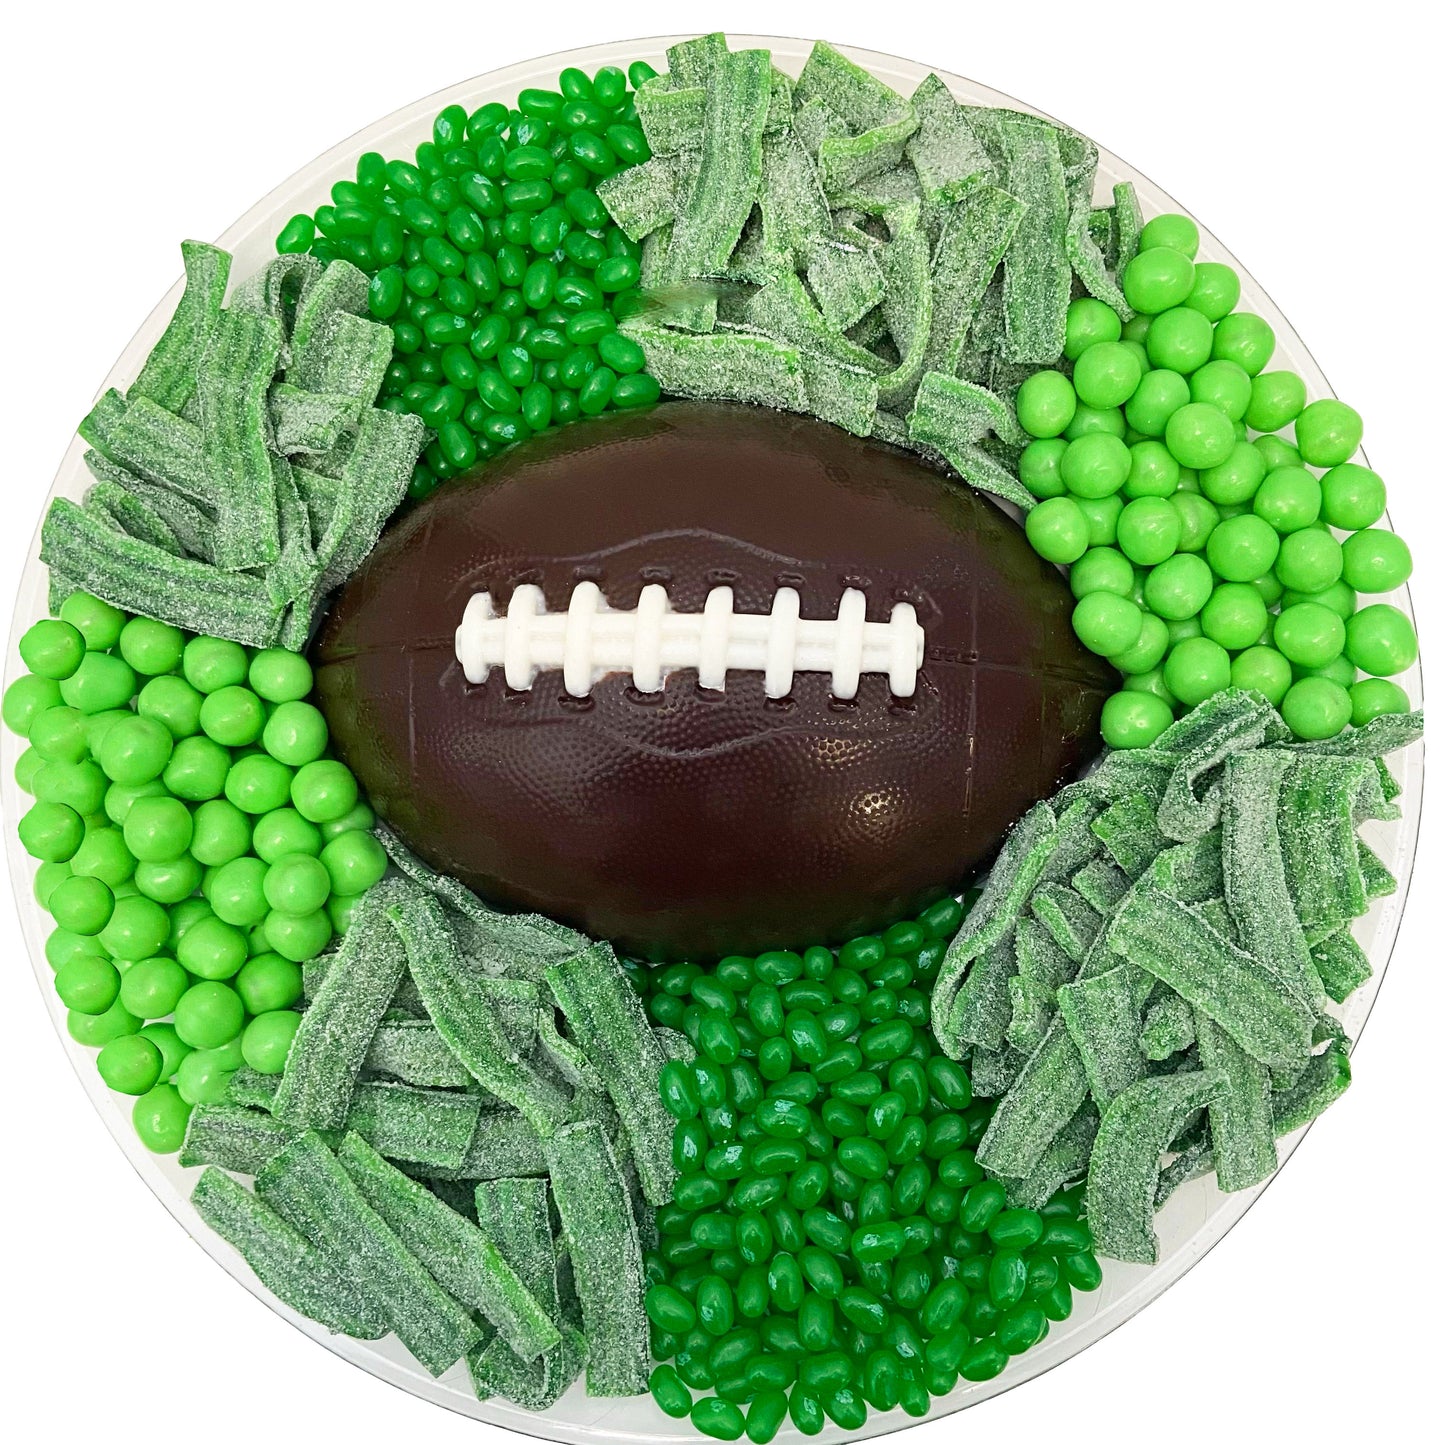 XL Candy Platter with Football Smash Cake, Green Candy